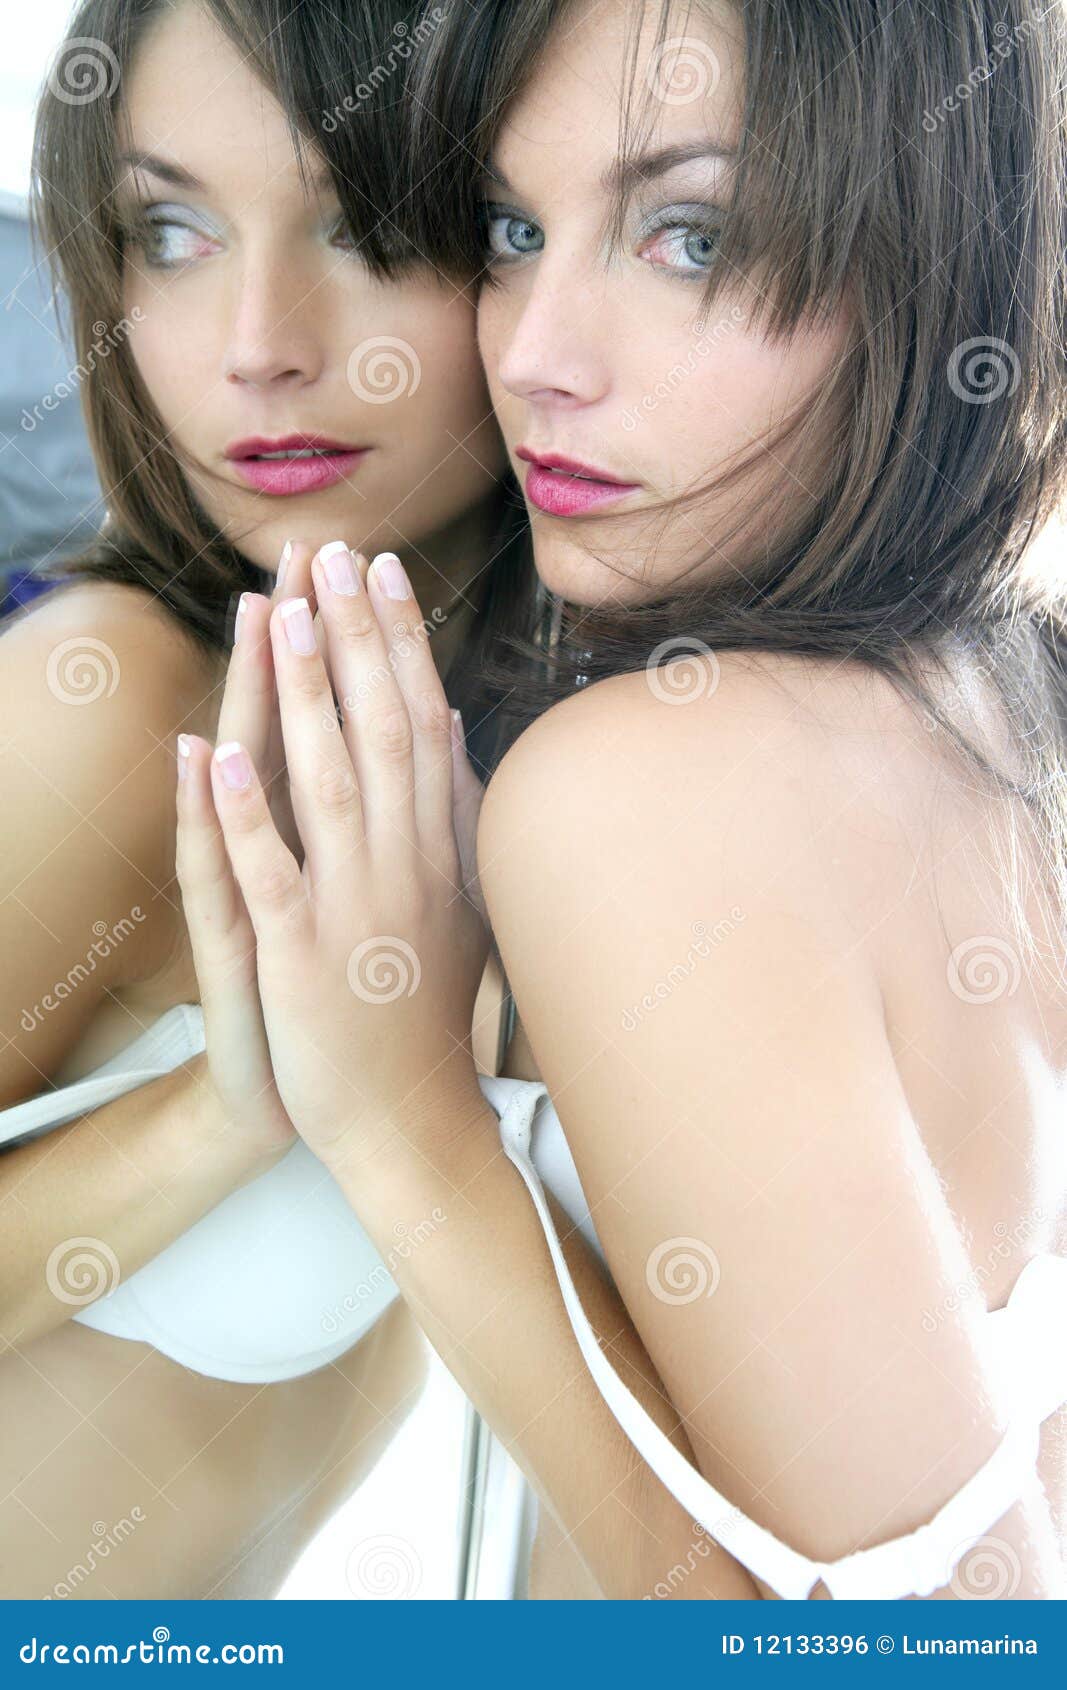 1,434 Two Young Beautiful Woman Twins Stock Photos